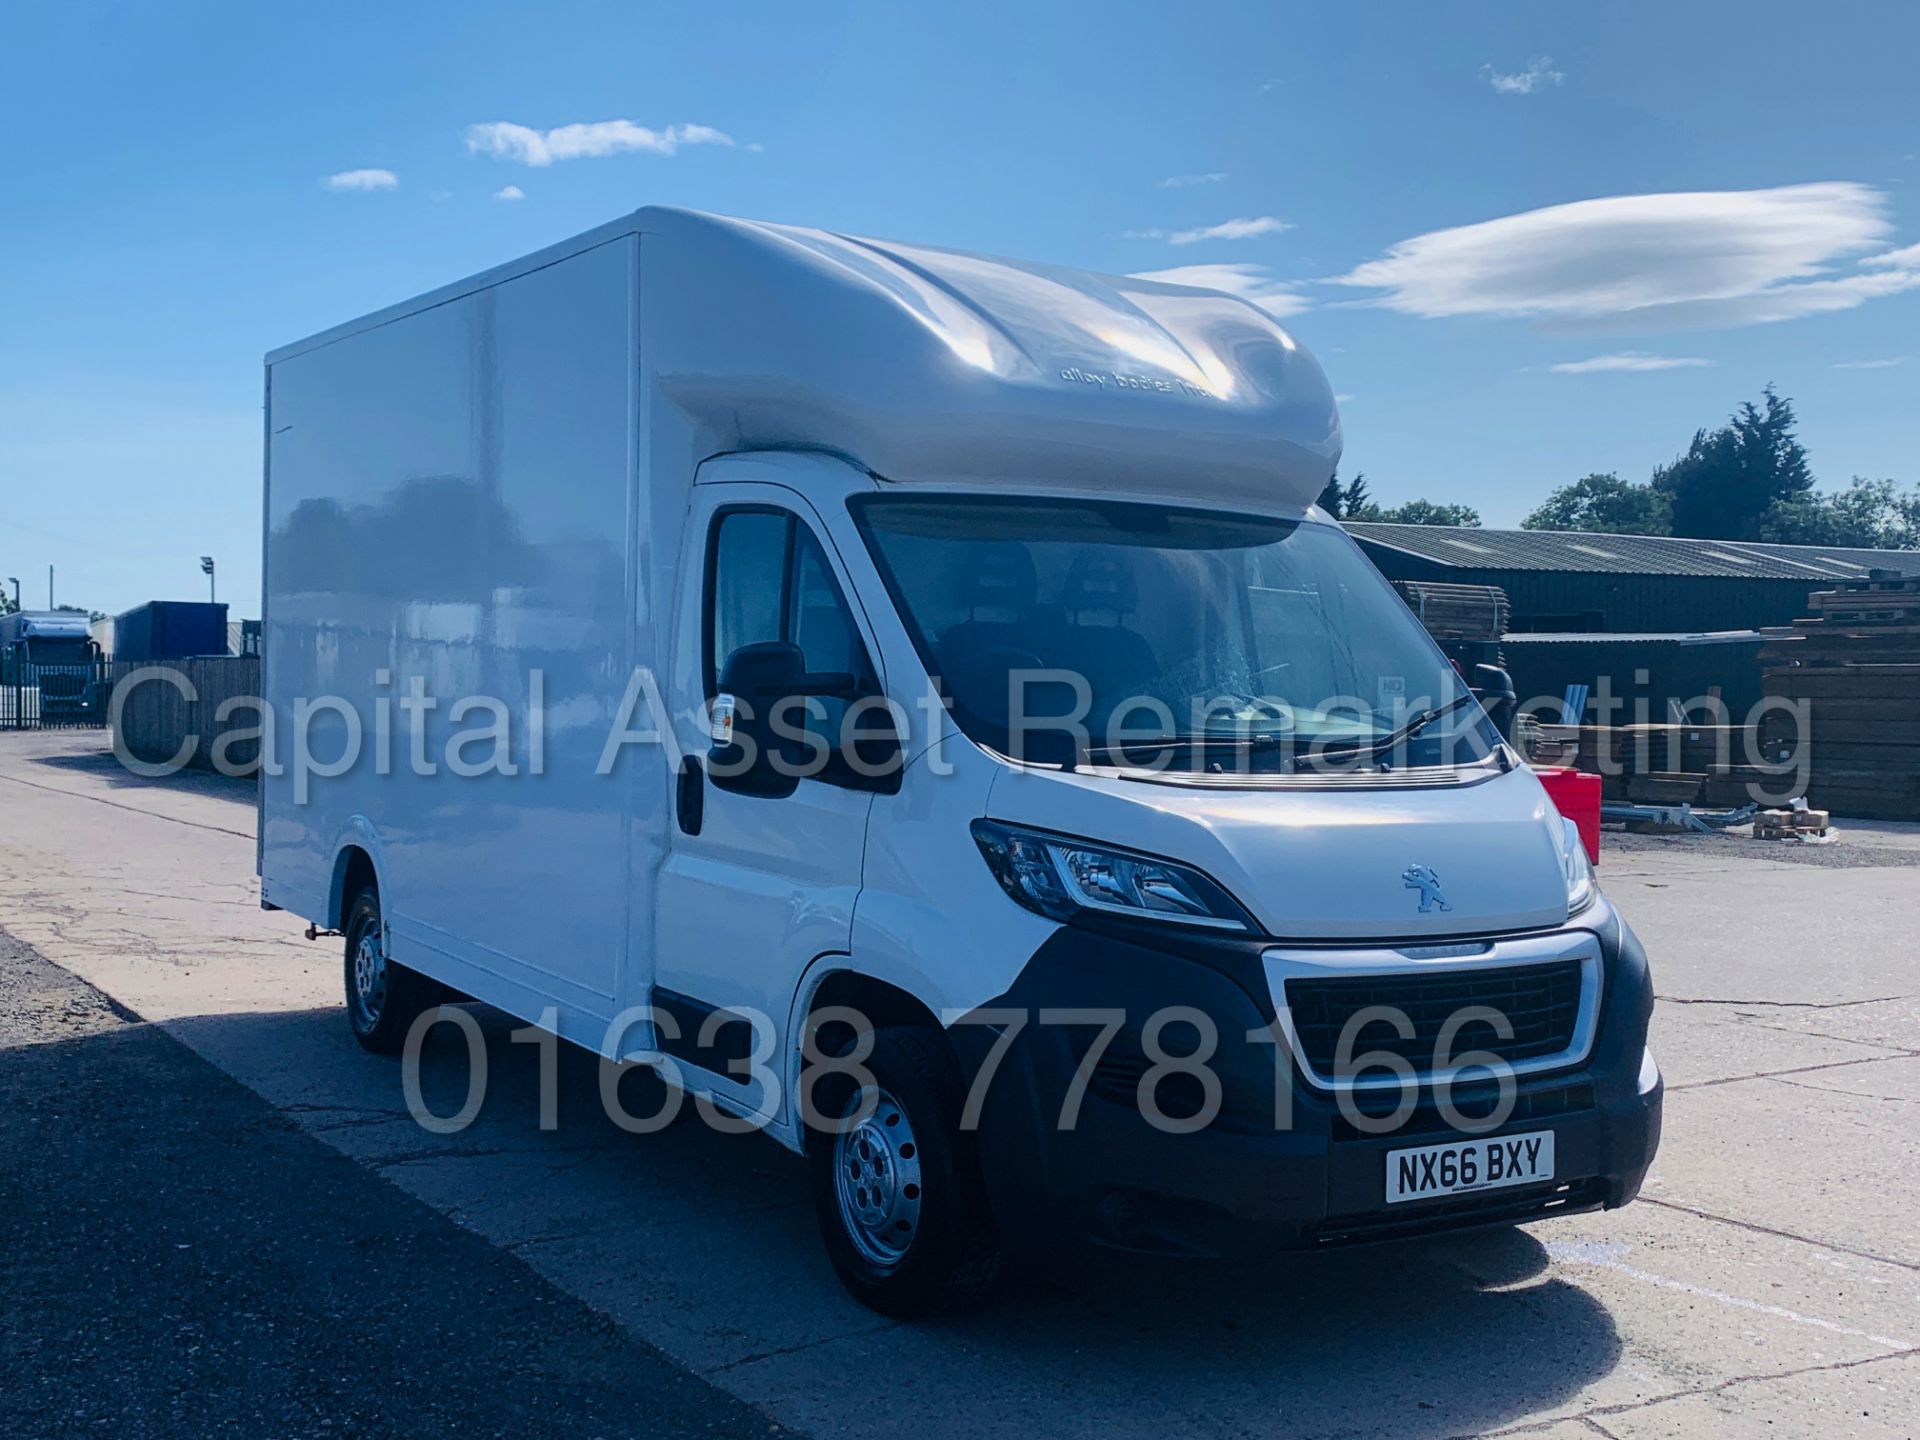 (On Sale) PEUGEOT BOXER *LWB- LO-LOADER / LUTON* (2017 - EURO 6) '2.2 HDI - 6 SPEED' (1 OWNER) - Image 3 of 37